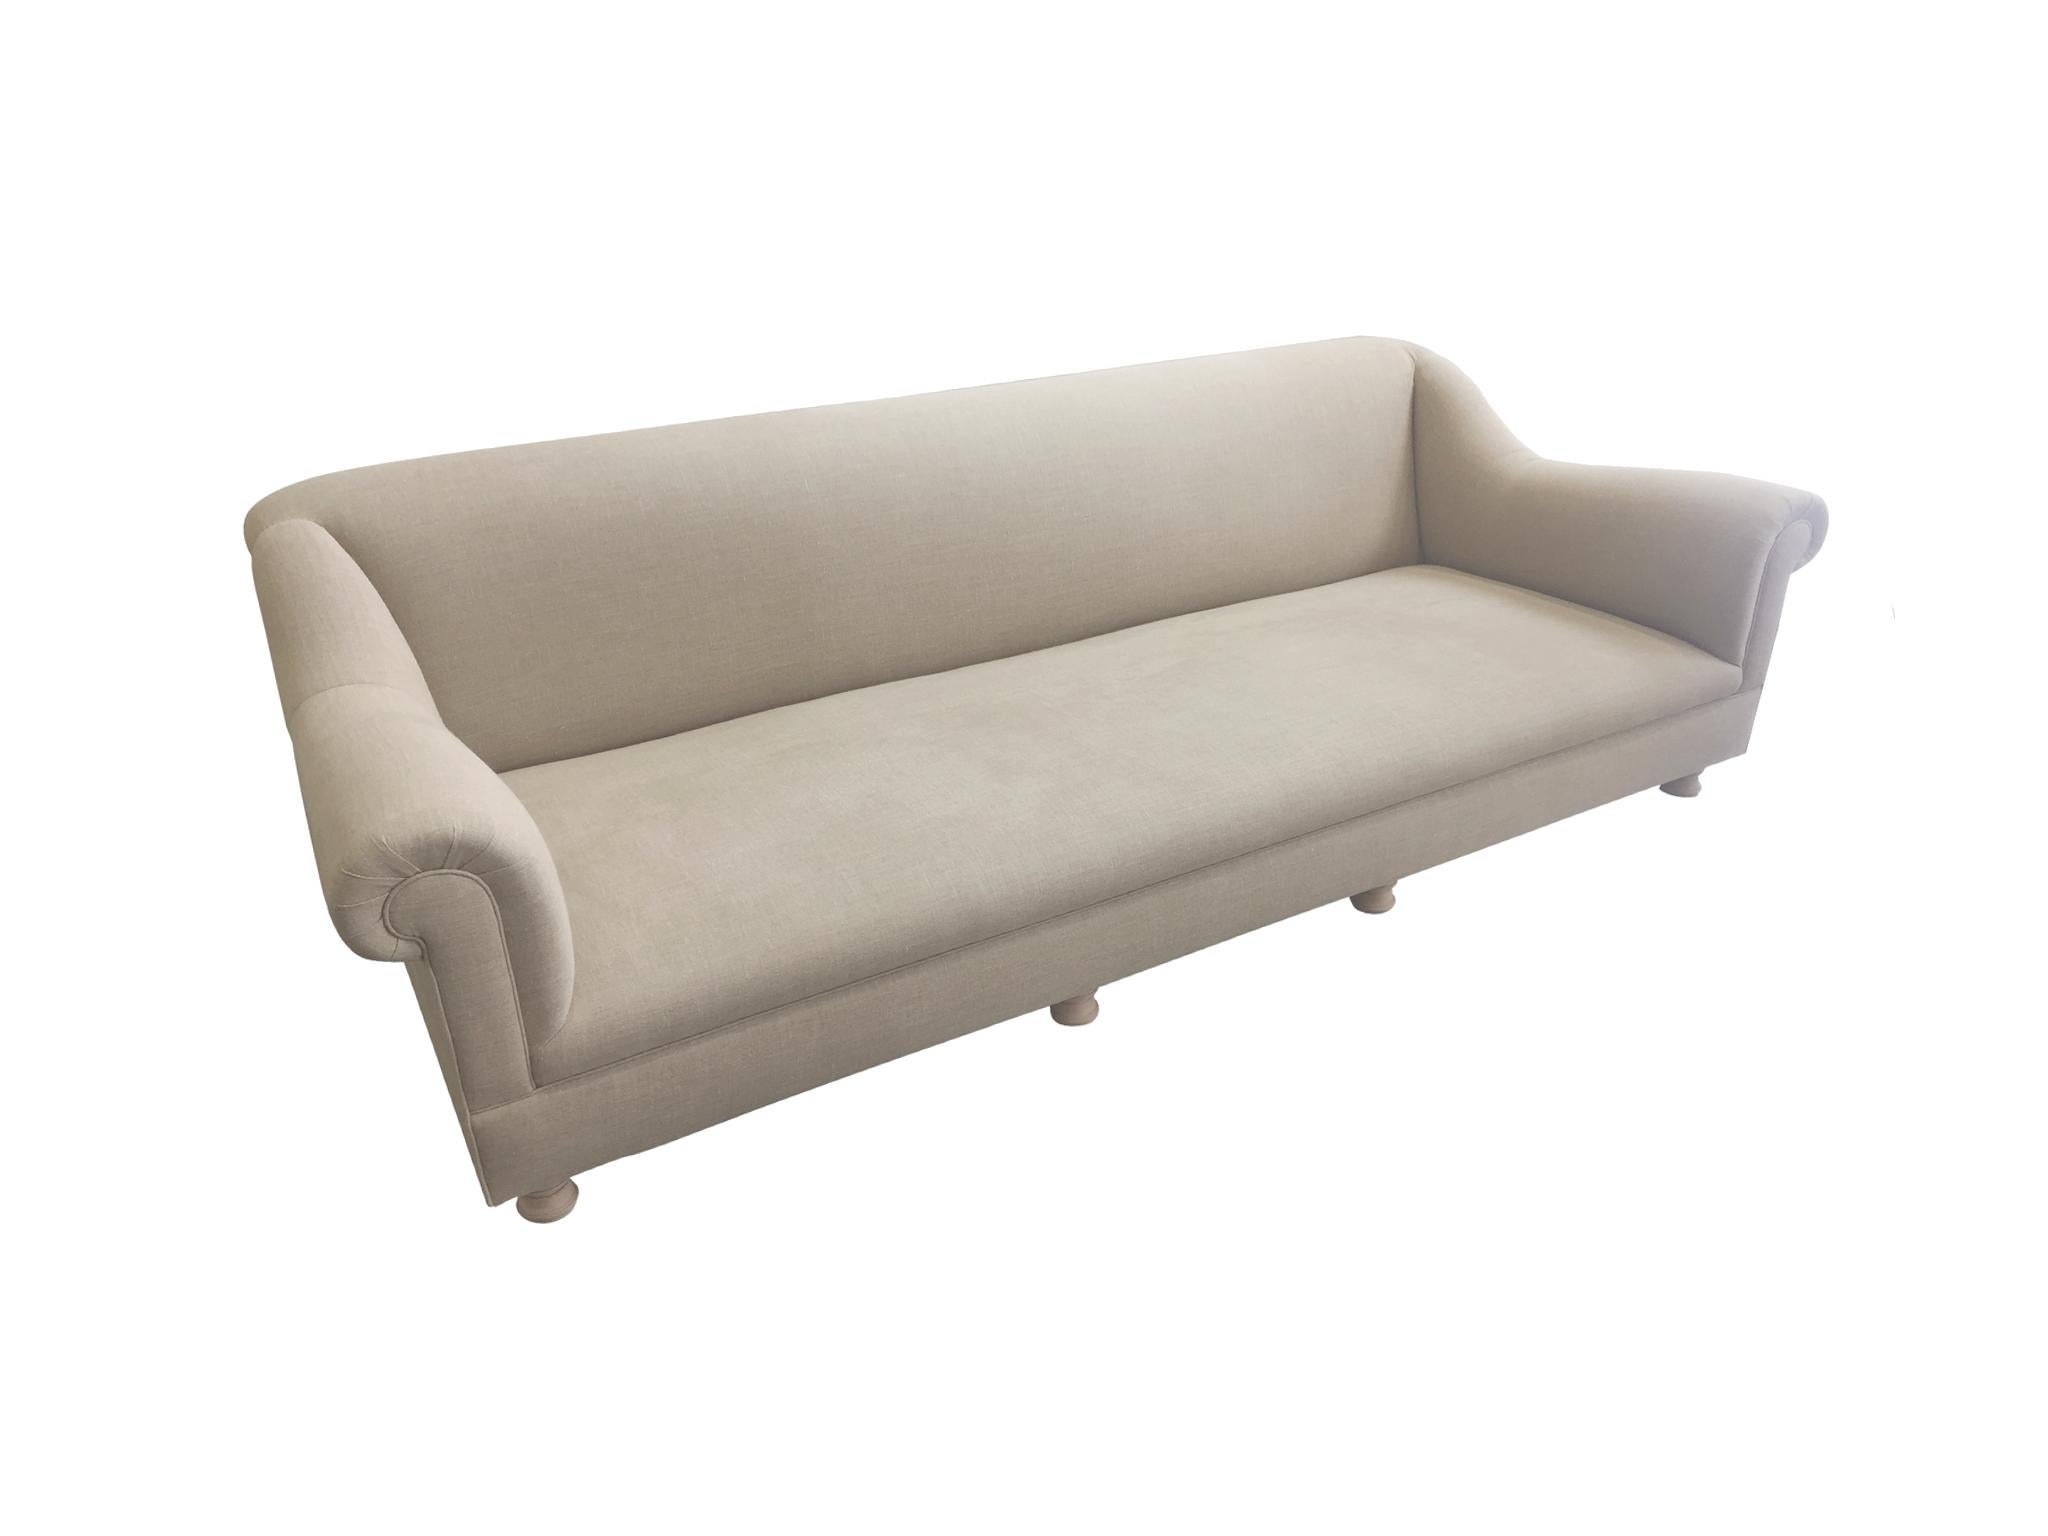 An elegant, low sofa designed by the antiques dealer and interior designer Axel Vervoordt. The sofa is a modern take on classic forms. It consists of unadorned Belgian linen upholstery and unglazed wood bun feet. The austerity of the design brings